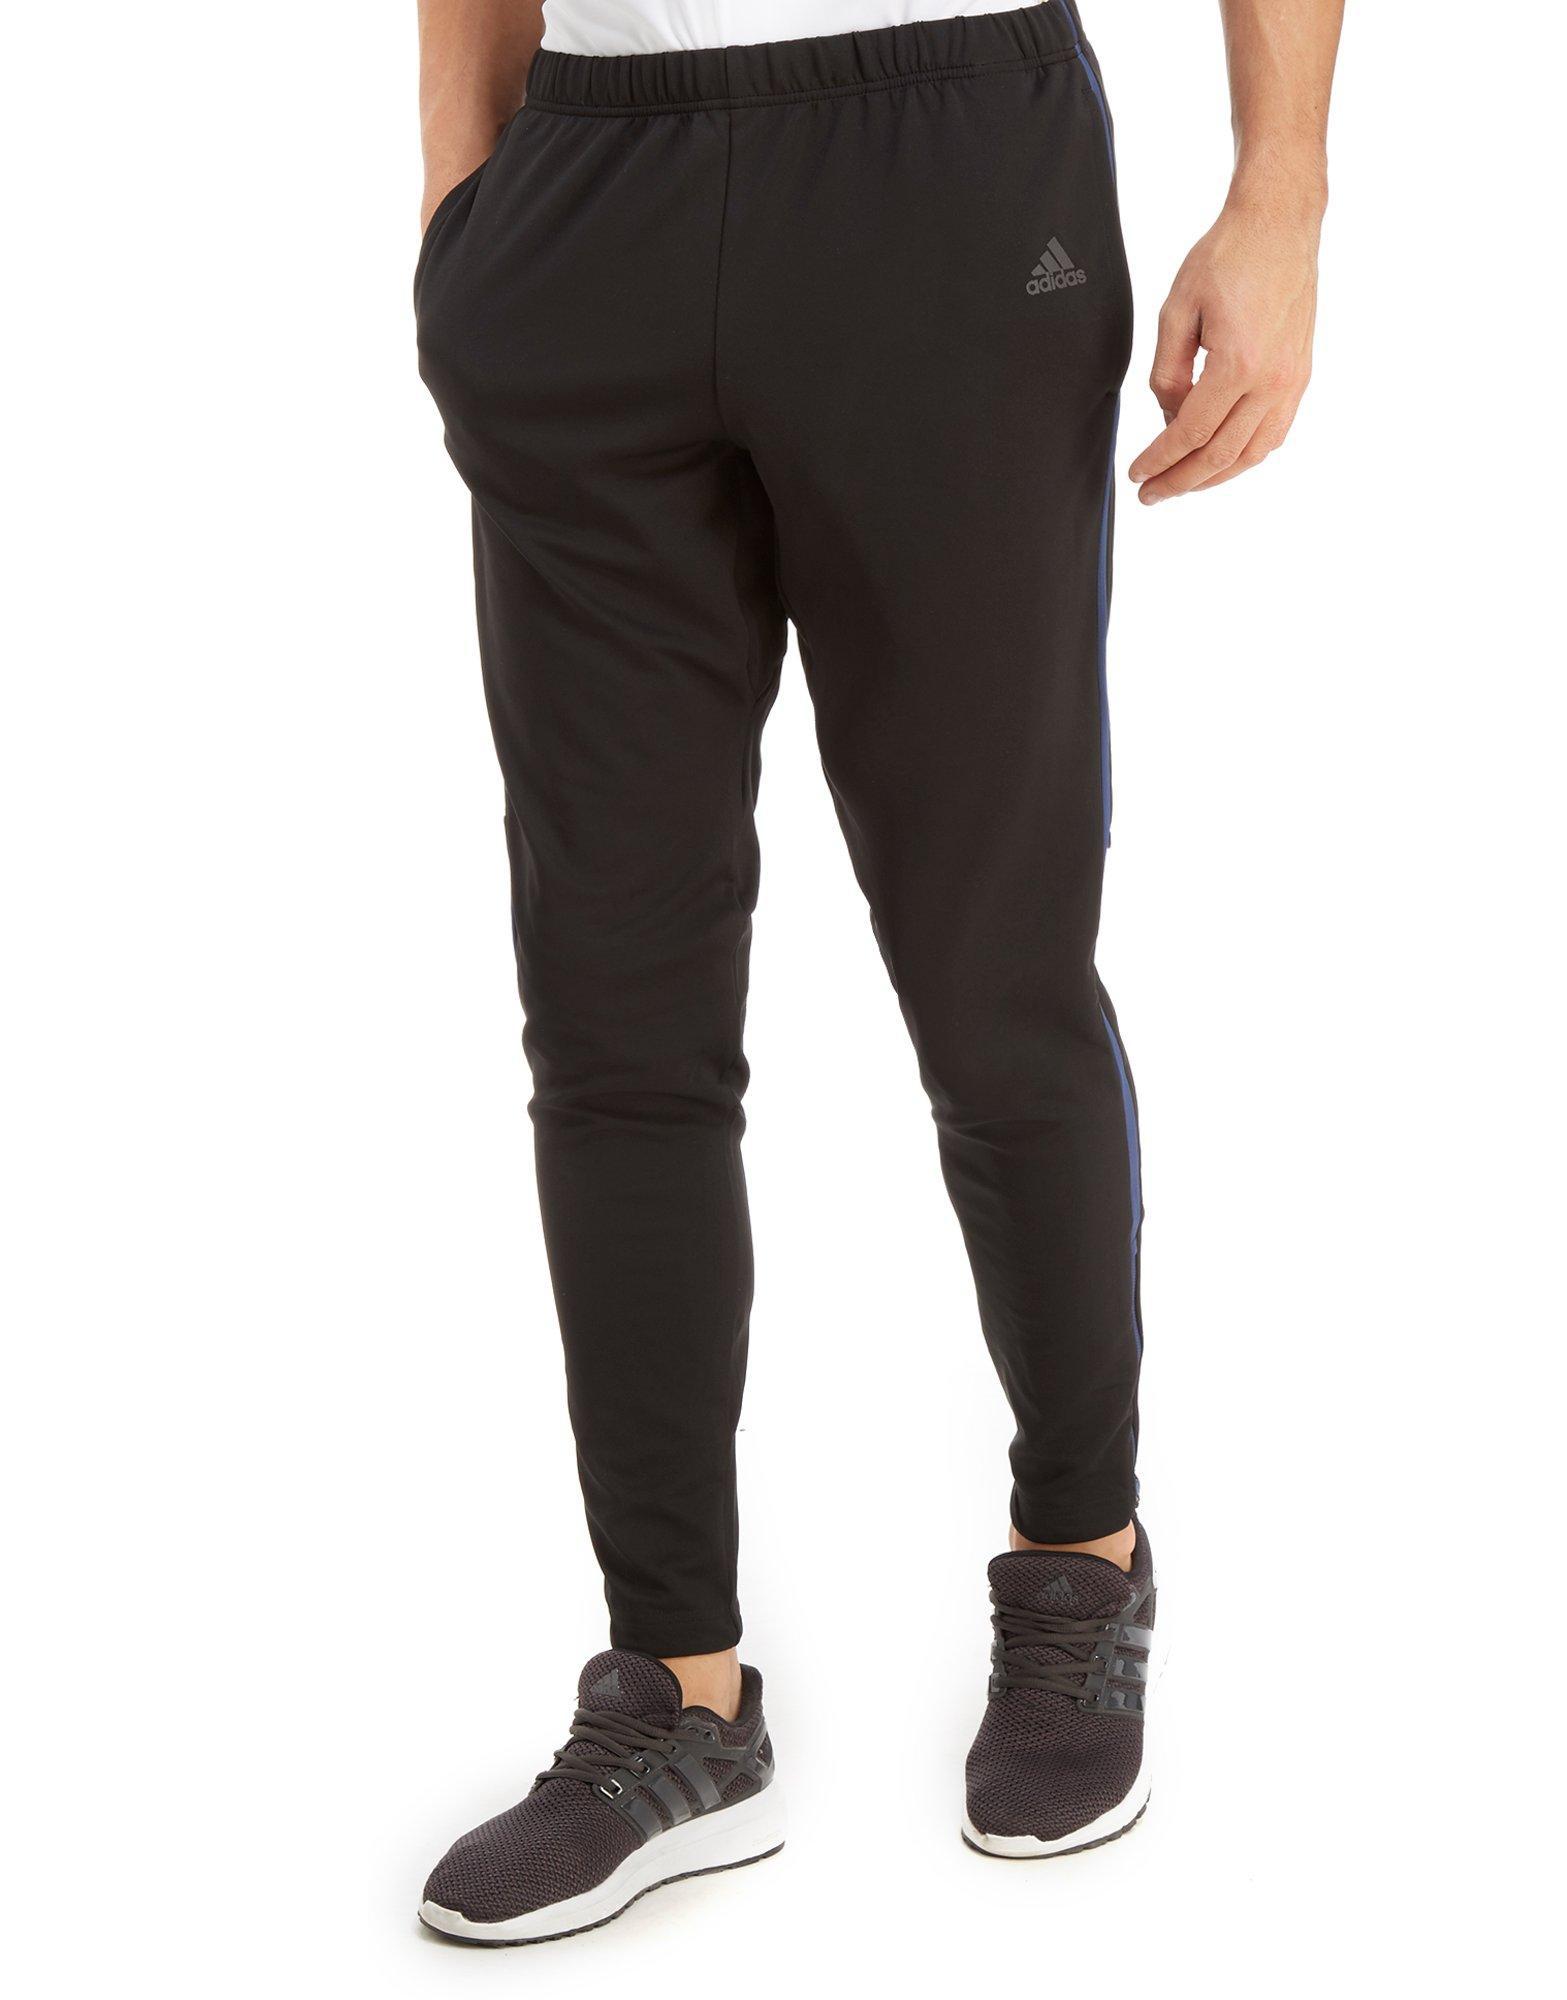 adidas Synthetic Response Astro Pants in Black for Men - Lyst